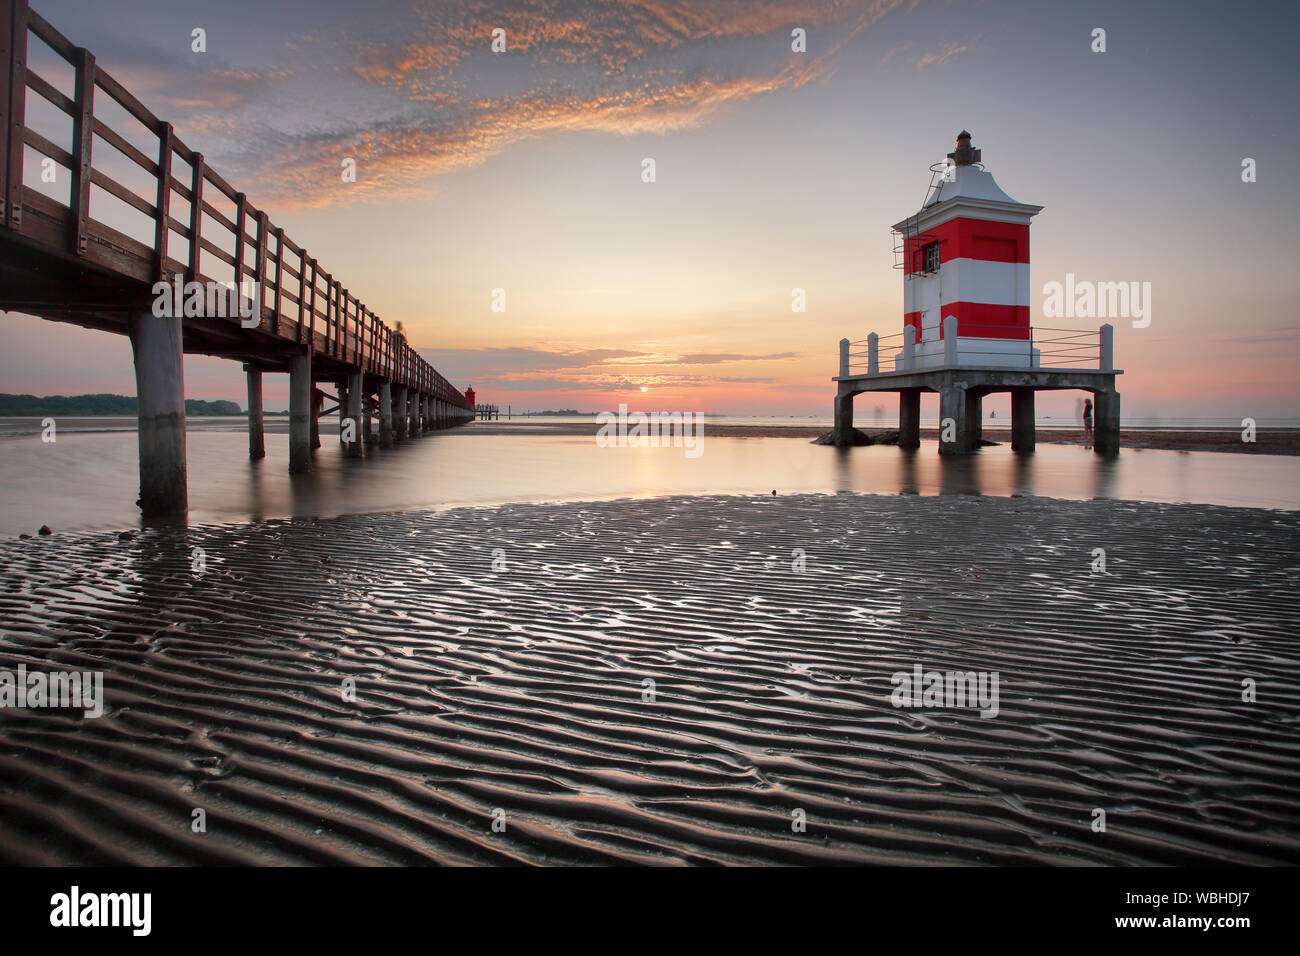 Wooden pier leading to a red lighthouse at sunrise in Lignano Sabbiadoro, Friuli, Italy - beach Stock Photo